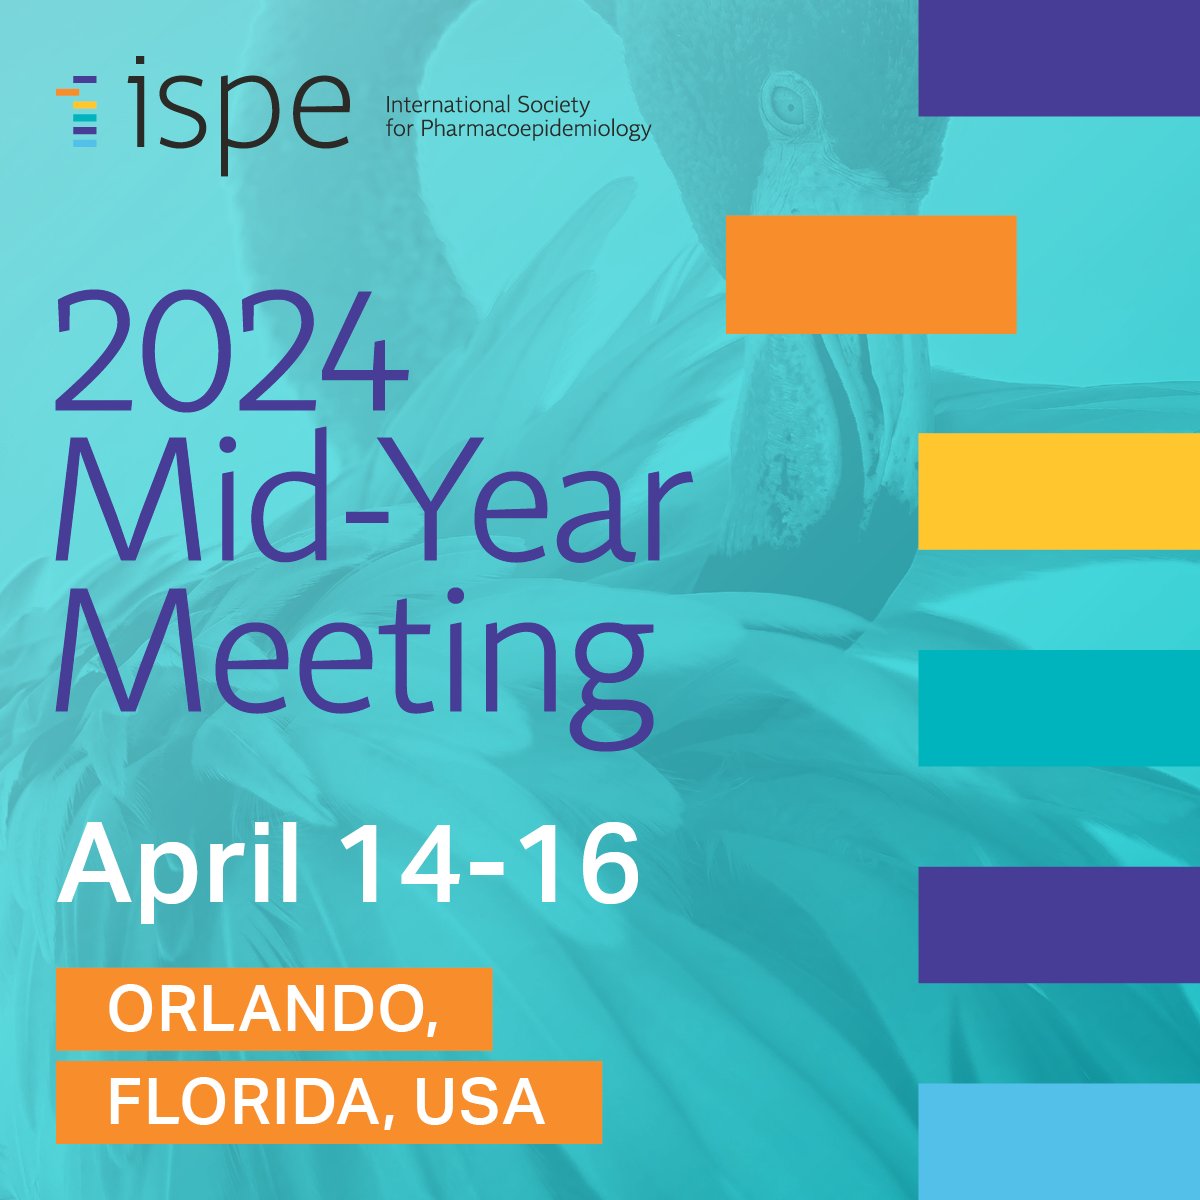 With #ISPEMY2024 happening next week in Orlando, we want to know: Who are we seeing there & what are you most looking forward to? Let us know in the comments & we'll see you soon! #PharmacoEpi #EpiTwitter #Pharmacoepidemiology #RWE